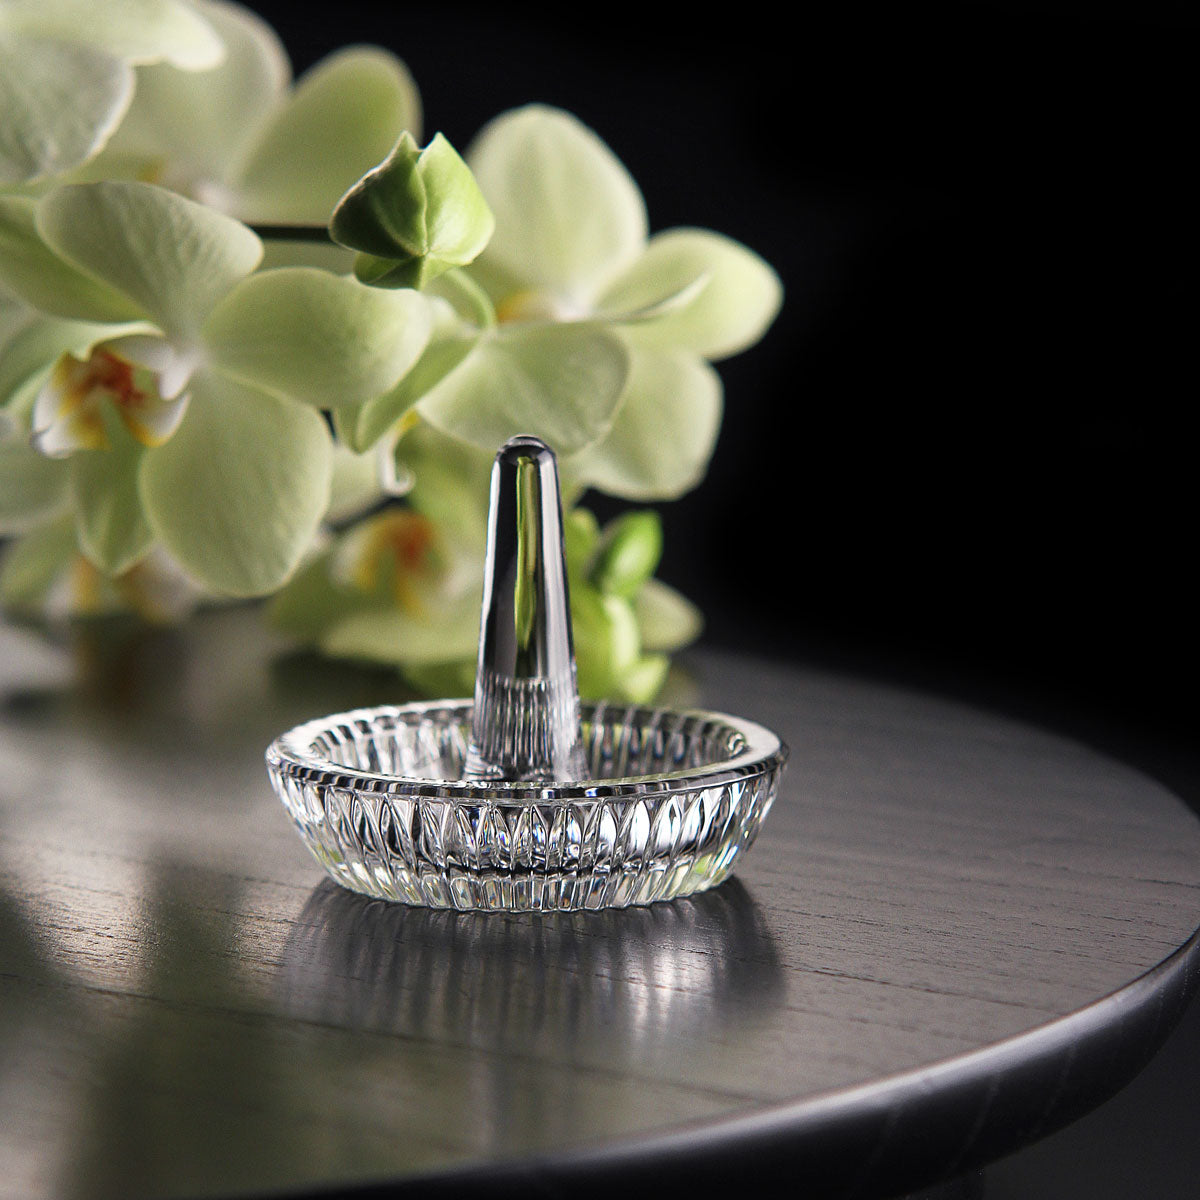 Waterford Crystal Heritage Round Ring Holder   Keep your engagement, wedding and decorative rings safe on this stunning crystal Ring Holder, which features a central spike for holding rings, and a round, ridged tray for storing necklaces or earrings. An elegant addition to any desk or vanity.